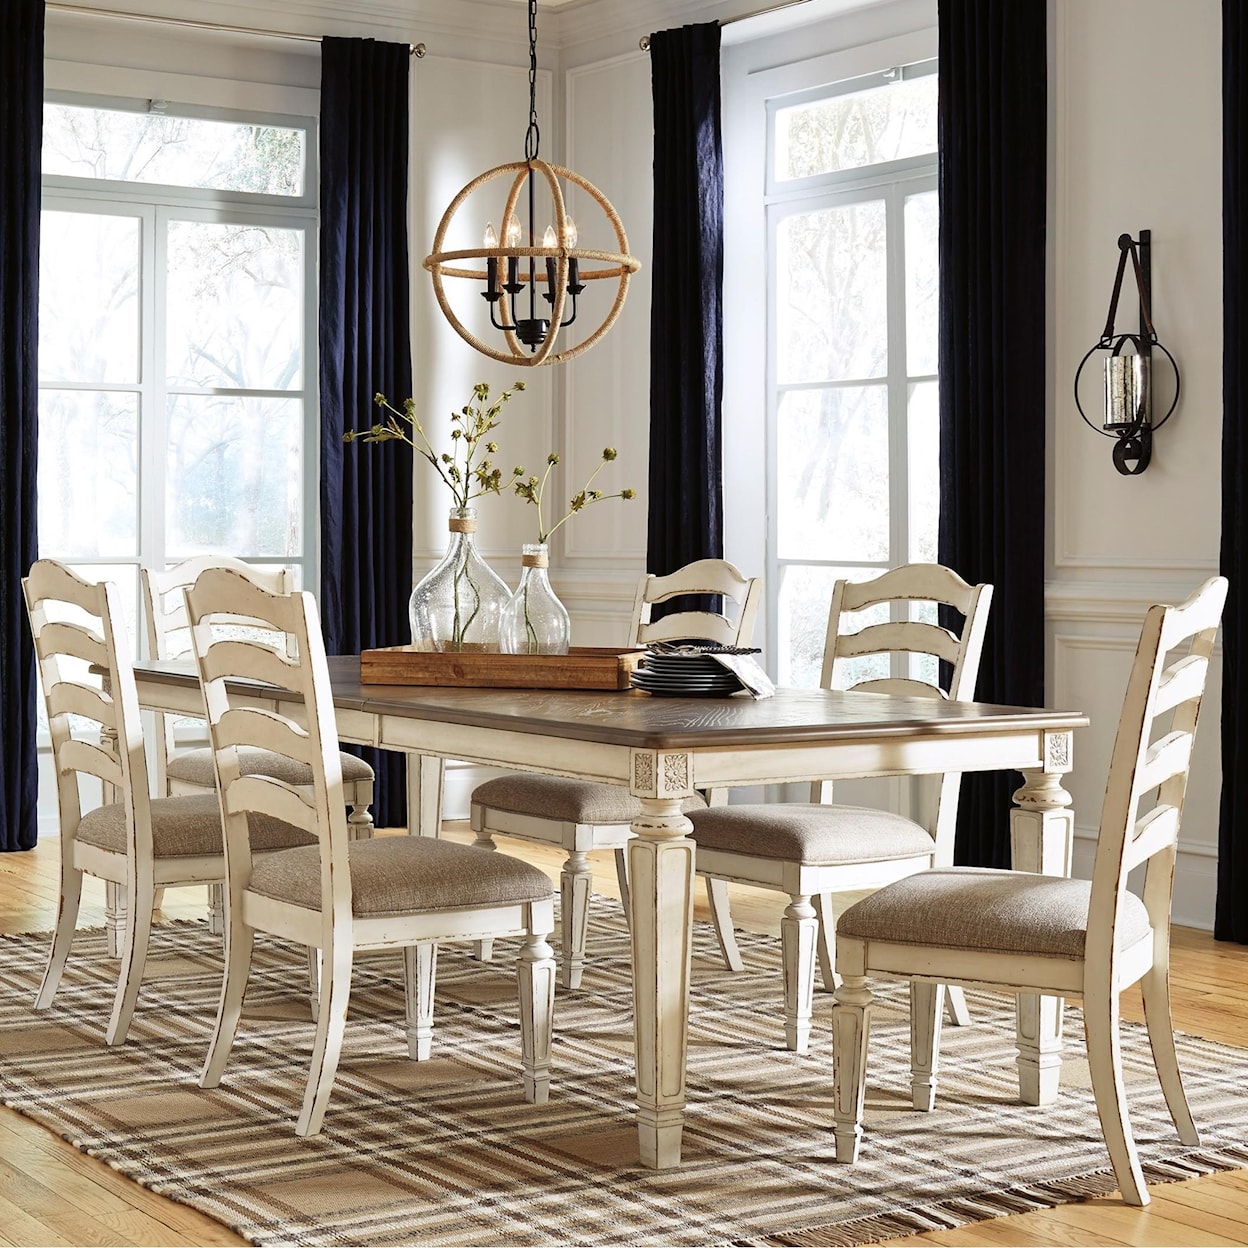 Signature Design by Ashley Realyn 7-Piece Rectangular Table and Chair Set